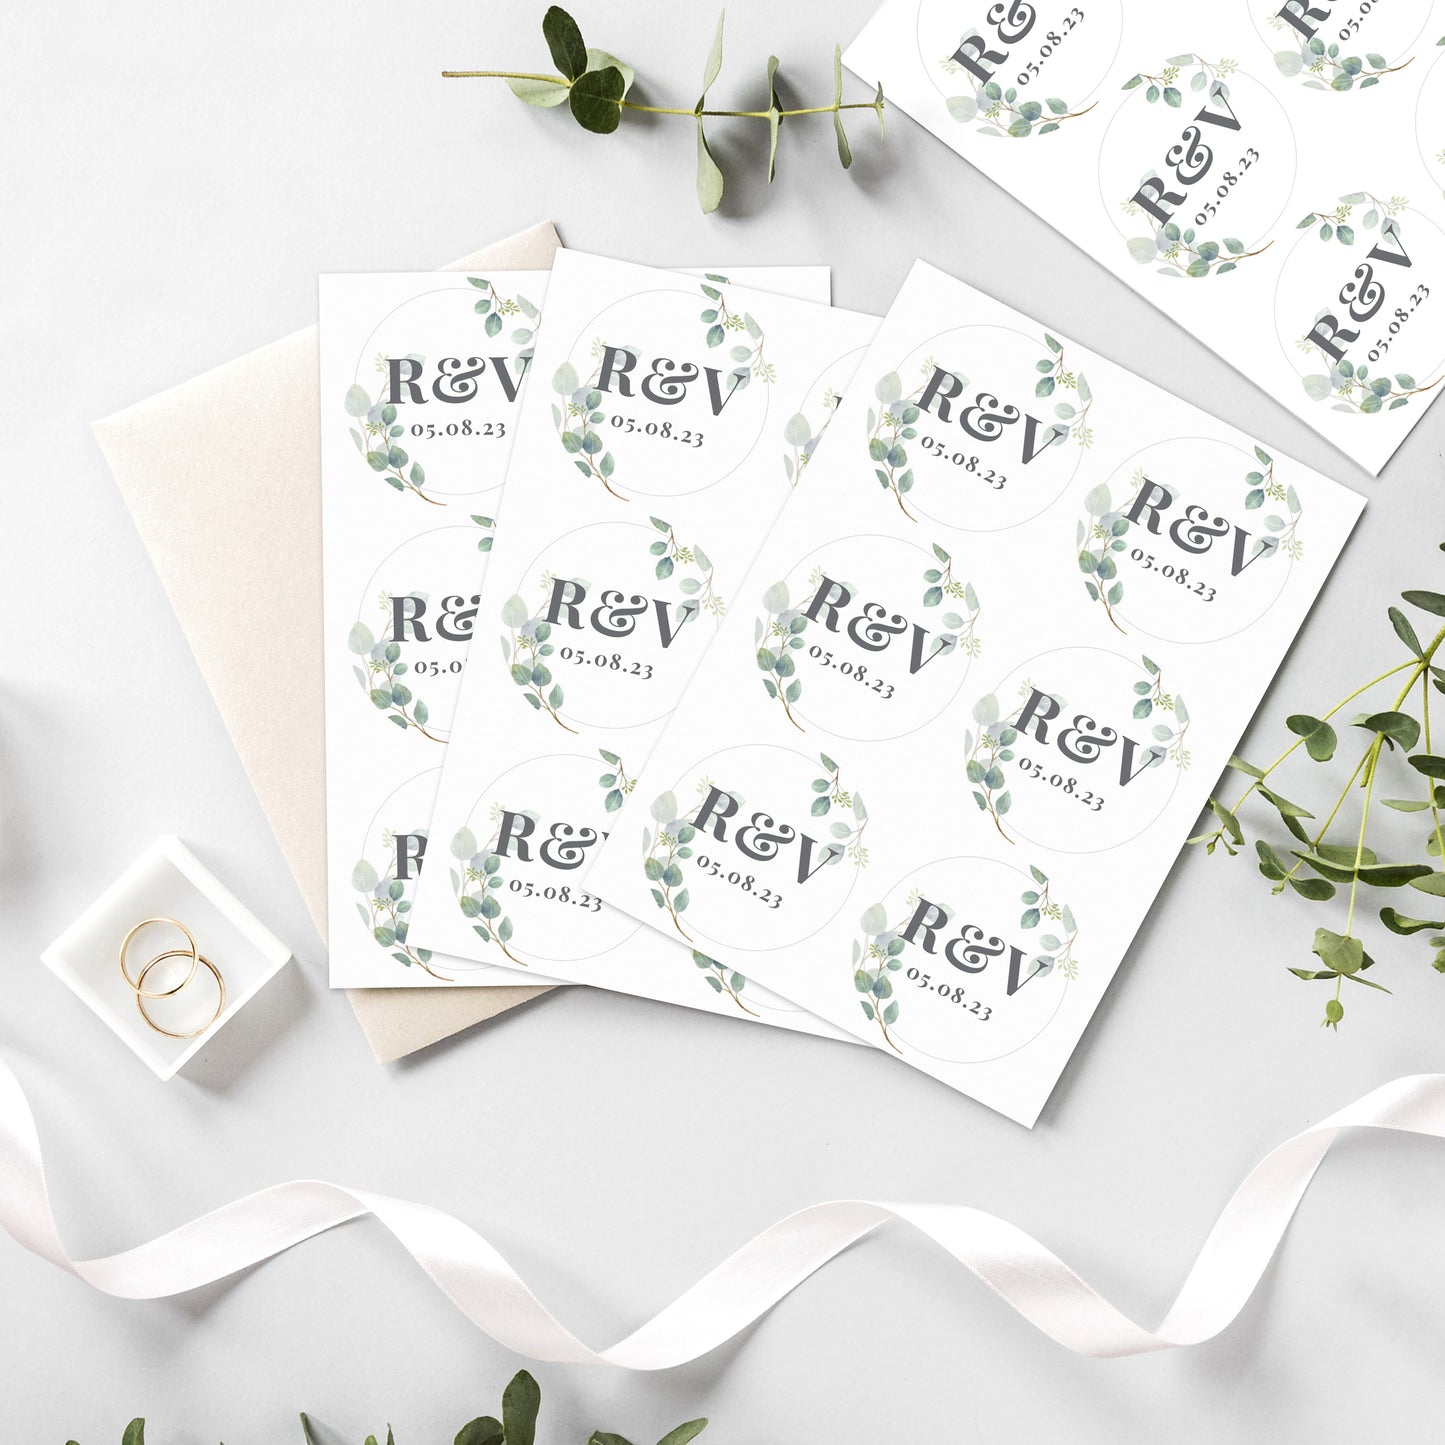 Personalised wedding sticky labels with pretty summer leafe design. Initials with ampersand and wedding date.